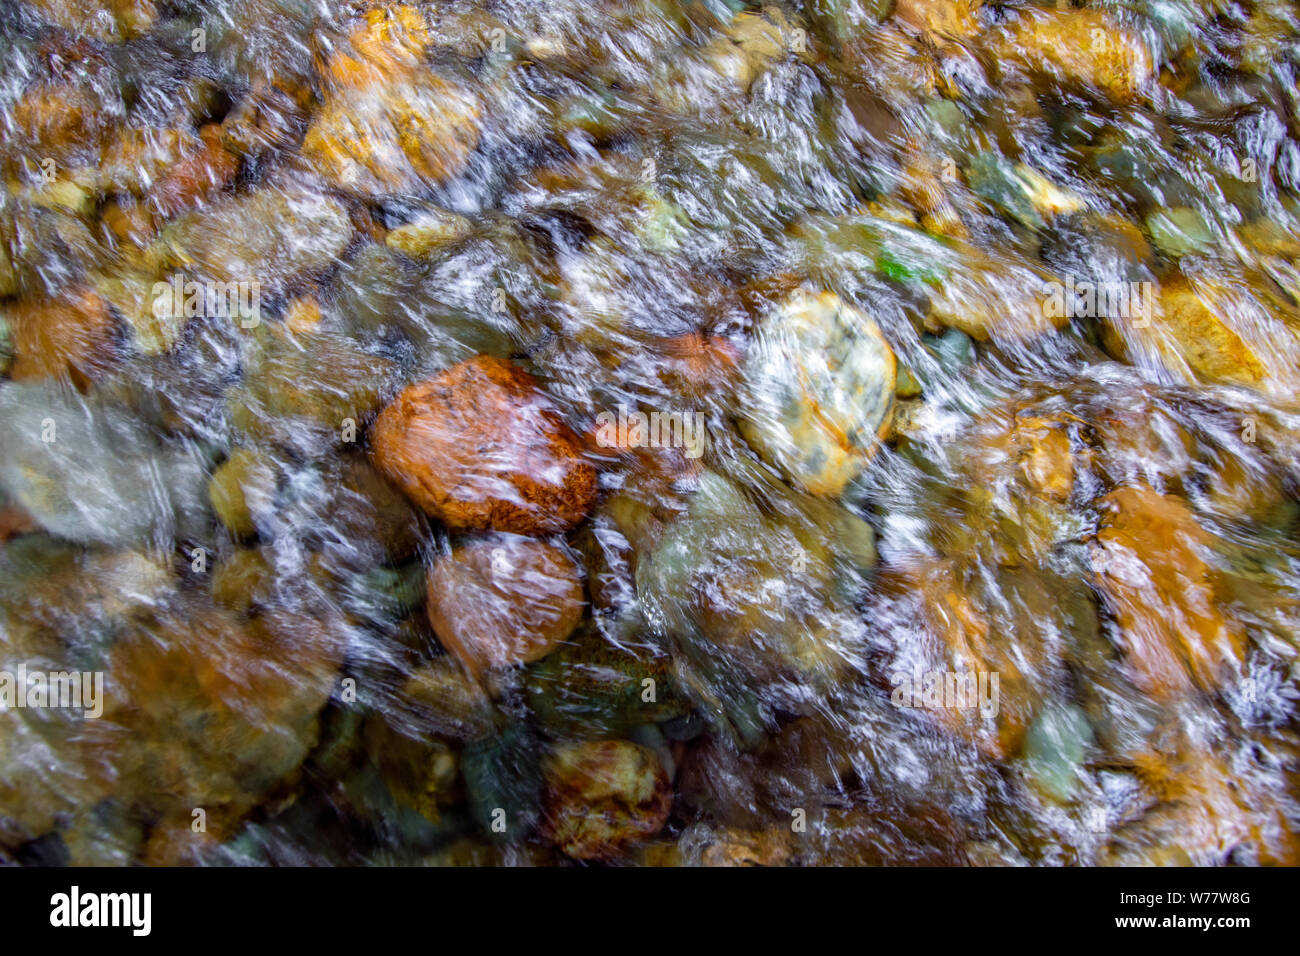 CA03435-00...CALIFORNIA - Abstract image of creek in Fern Canyon, Prairie Creek Redwoods State Park. Stock Photo